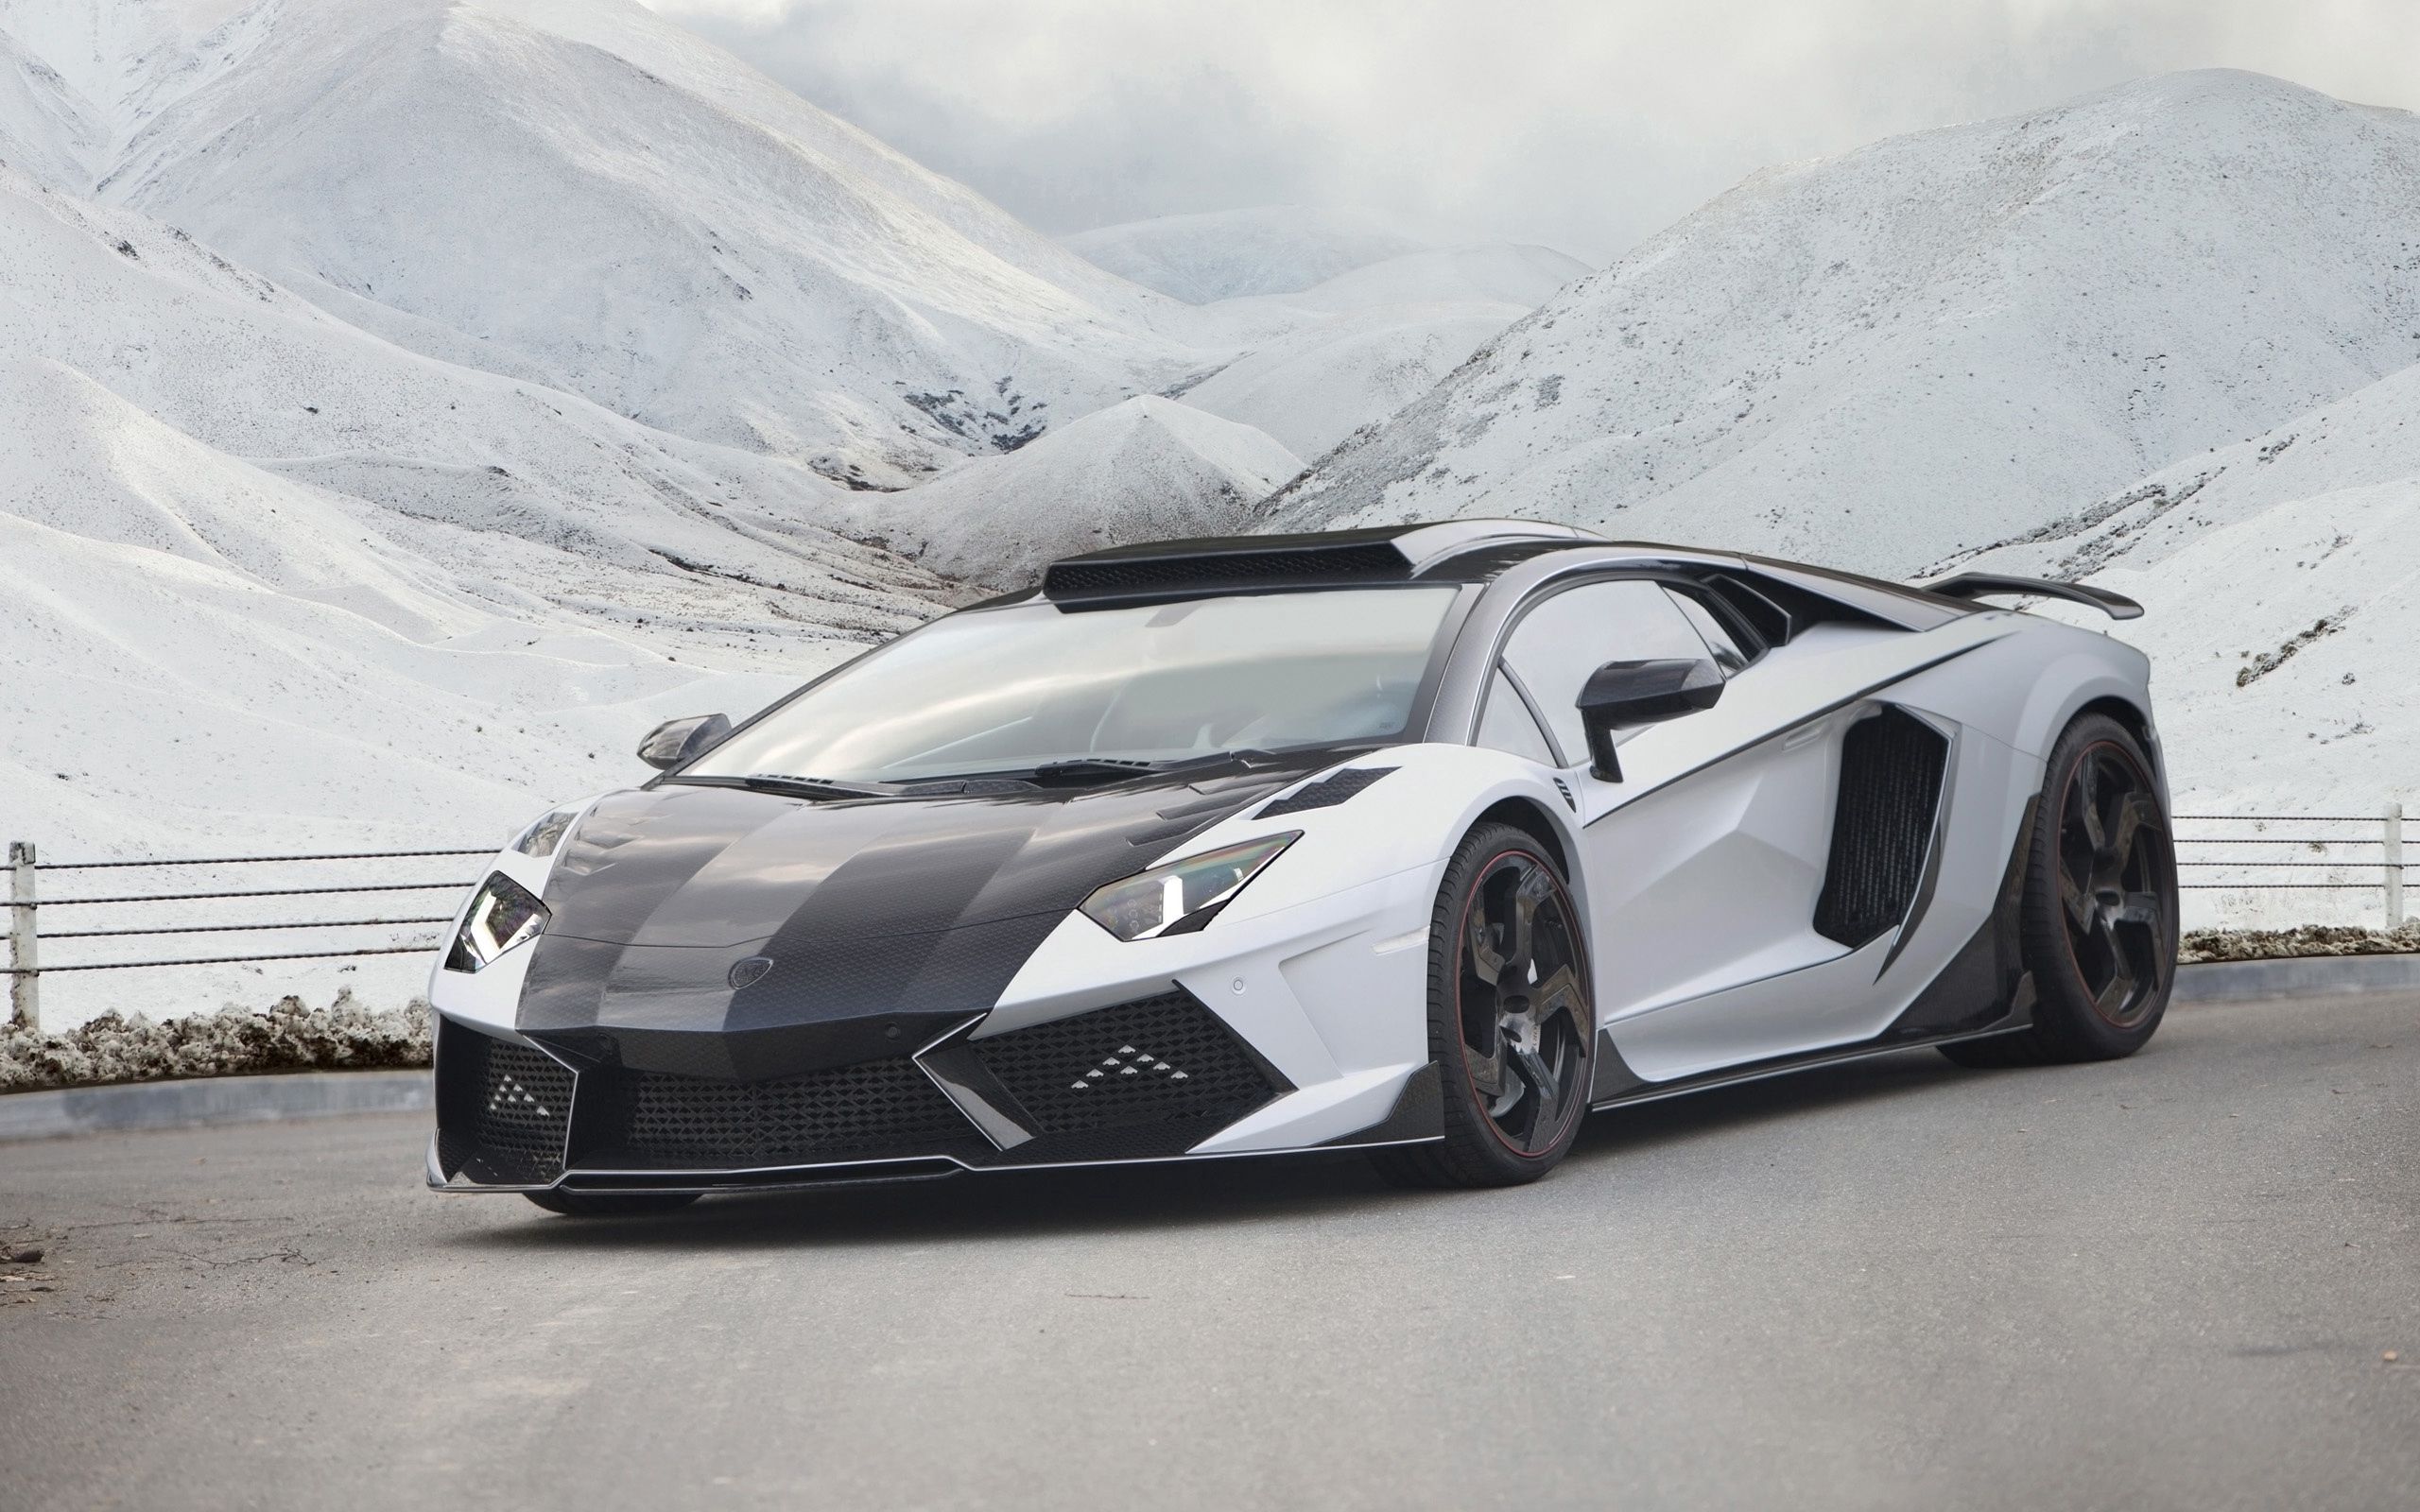 129490 Screensavers and Wallpapers Car Showroom for phone. Download car showroom, lamborghini, cars, 2014, motor show, gt, aventador, lp700-4, hypercar, mansory, carbonado, 1600-strong pictures for free